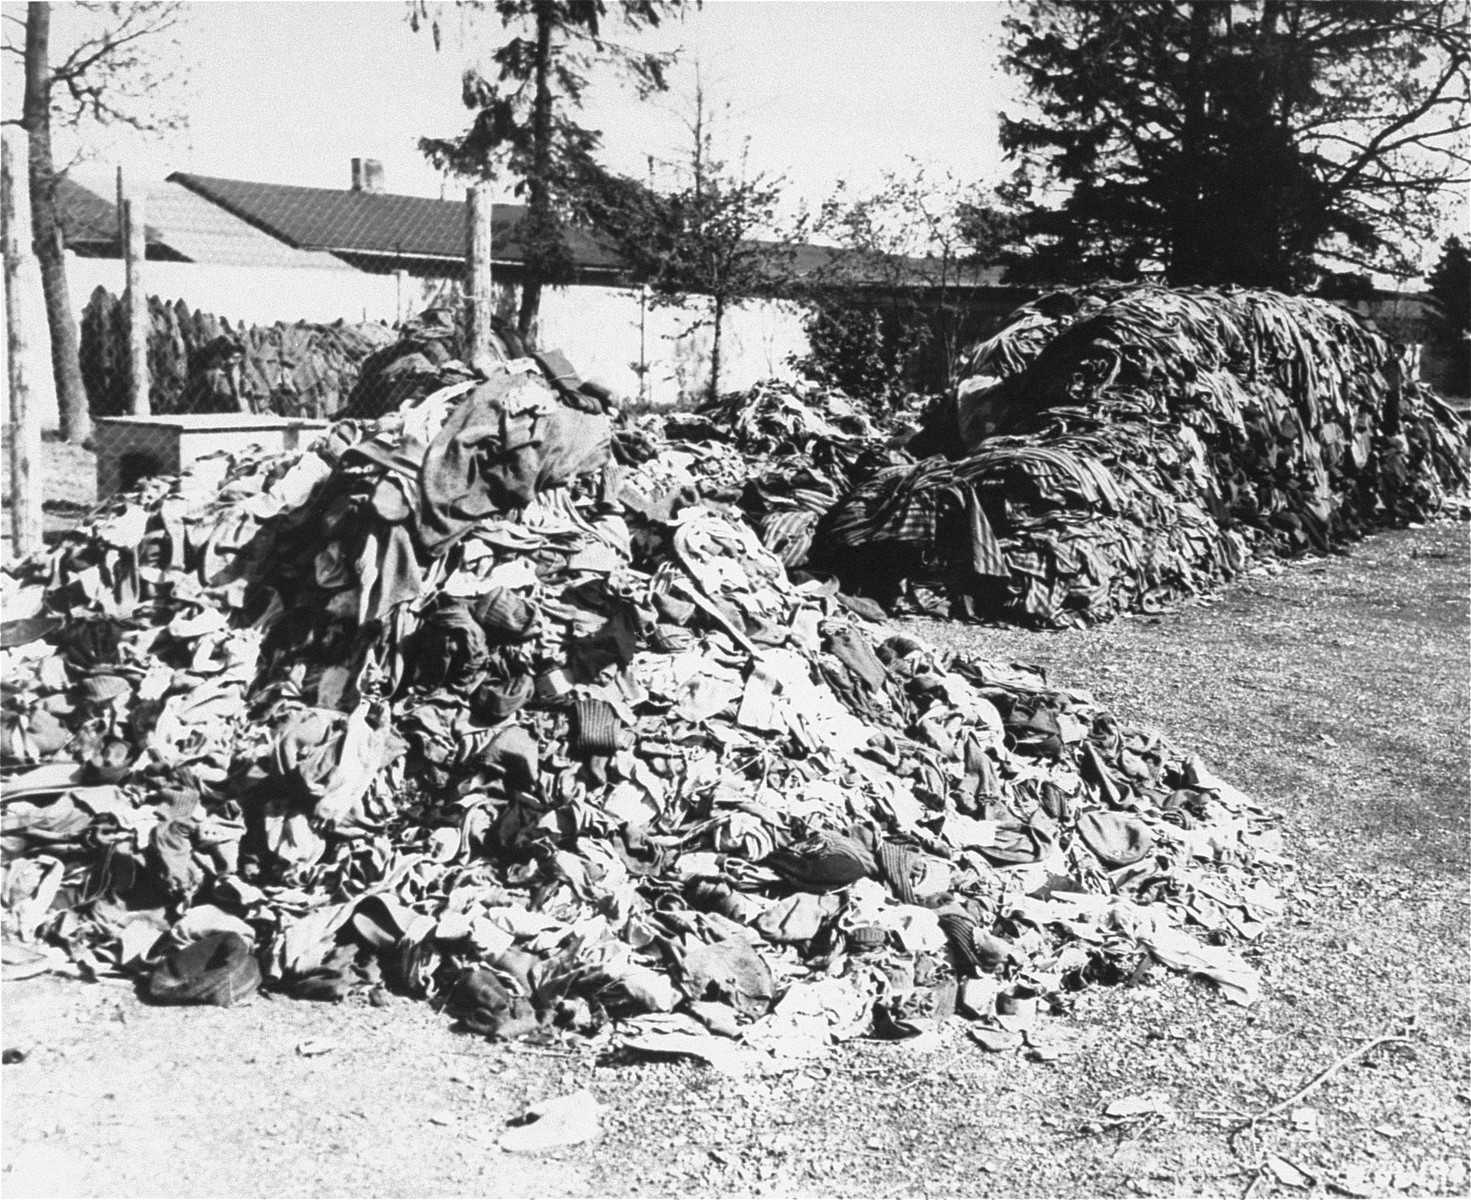 Prisoners' clothing is piled outside at the newly liberated Dachau concentration camp.